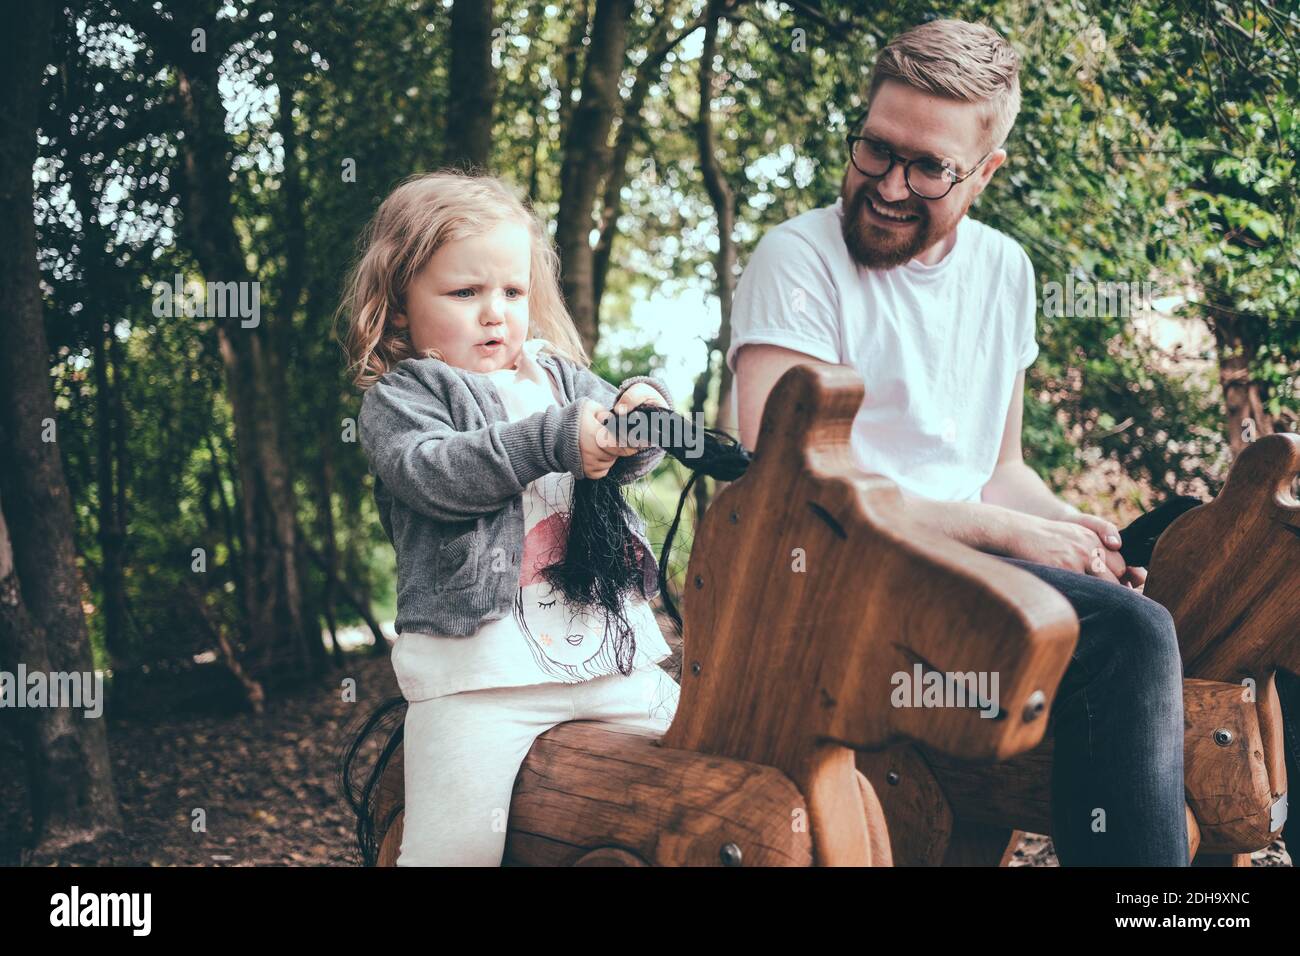 Happy father looking at daughter riding wooden horse in park Stock Photo